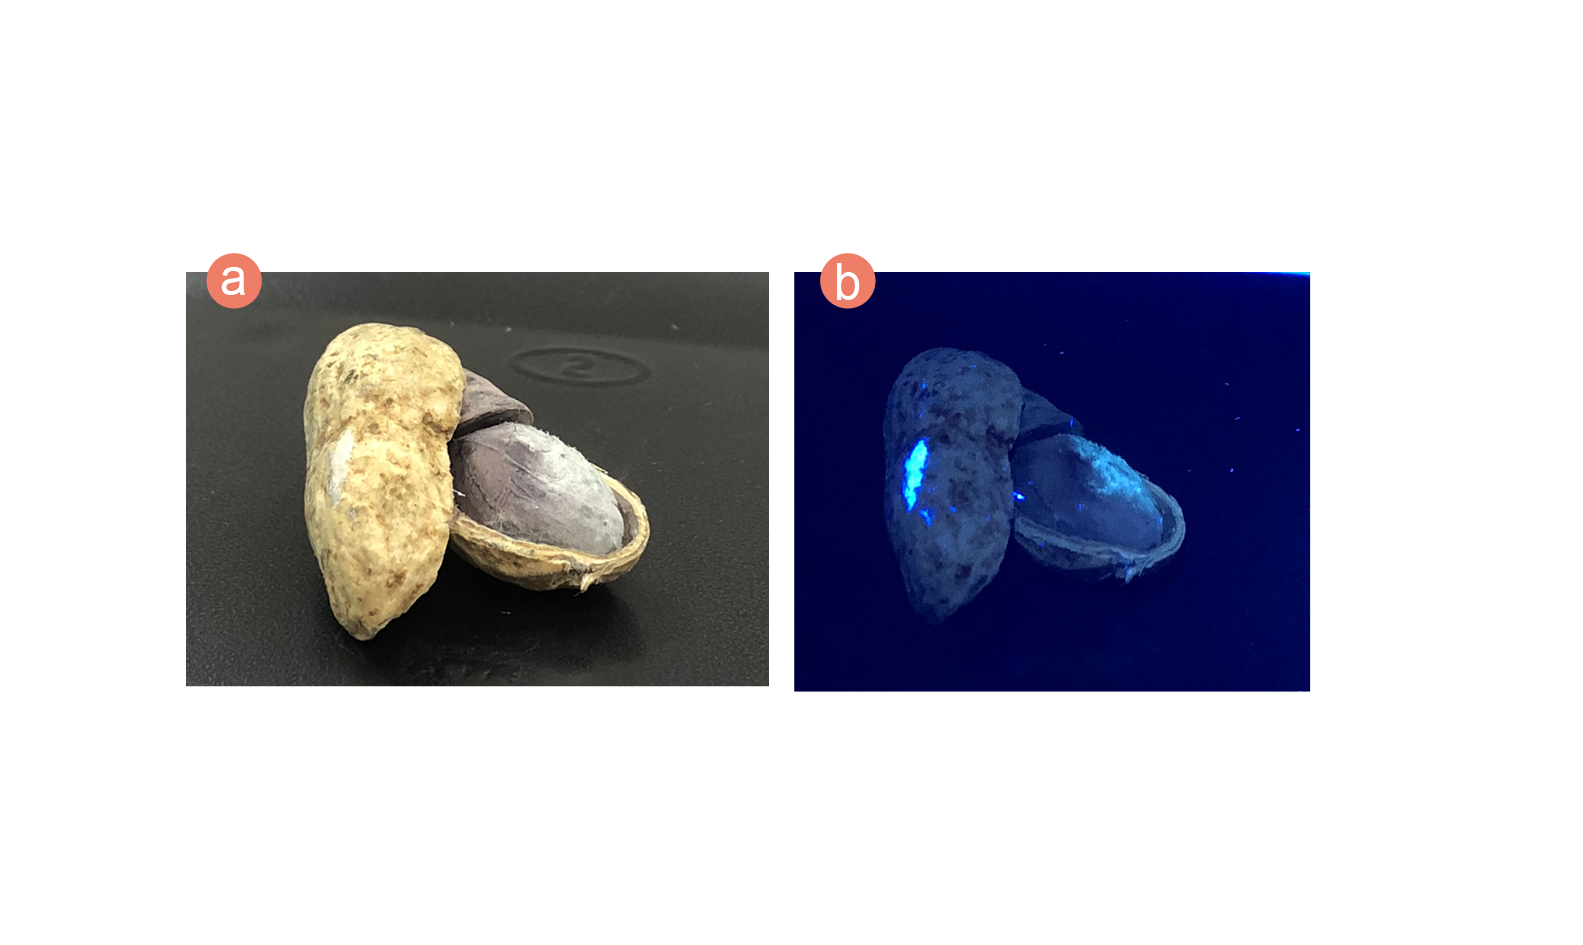 Figure 2: (a) Mouldy peanut and (b) mouldy peanut under UV light with fluorescence observed